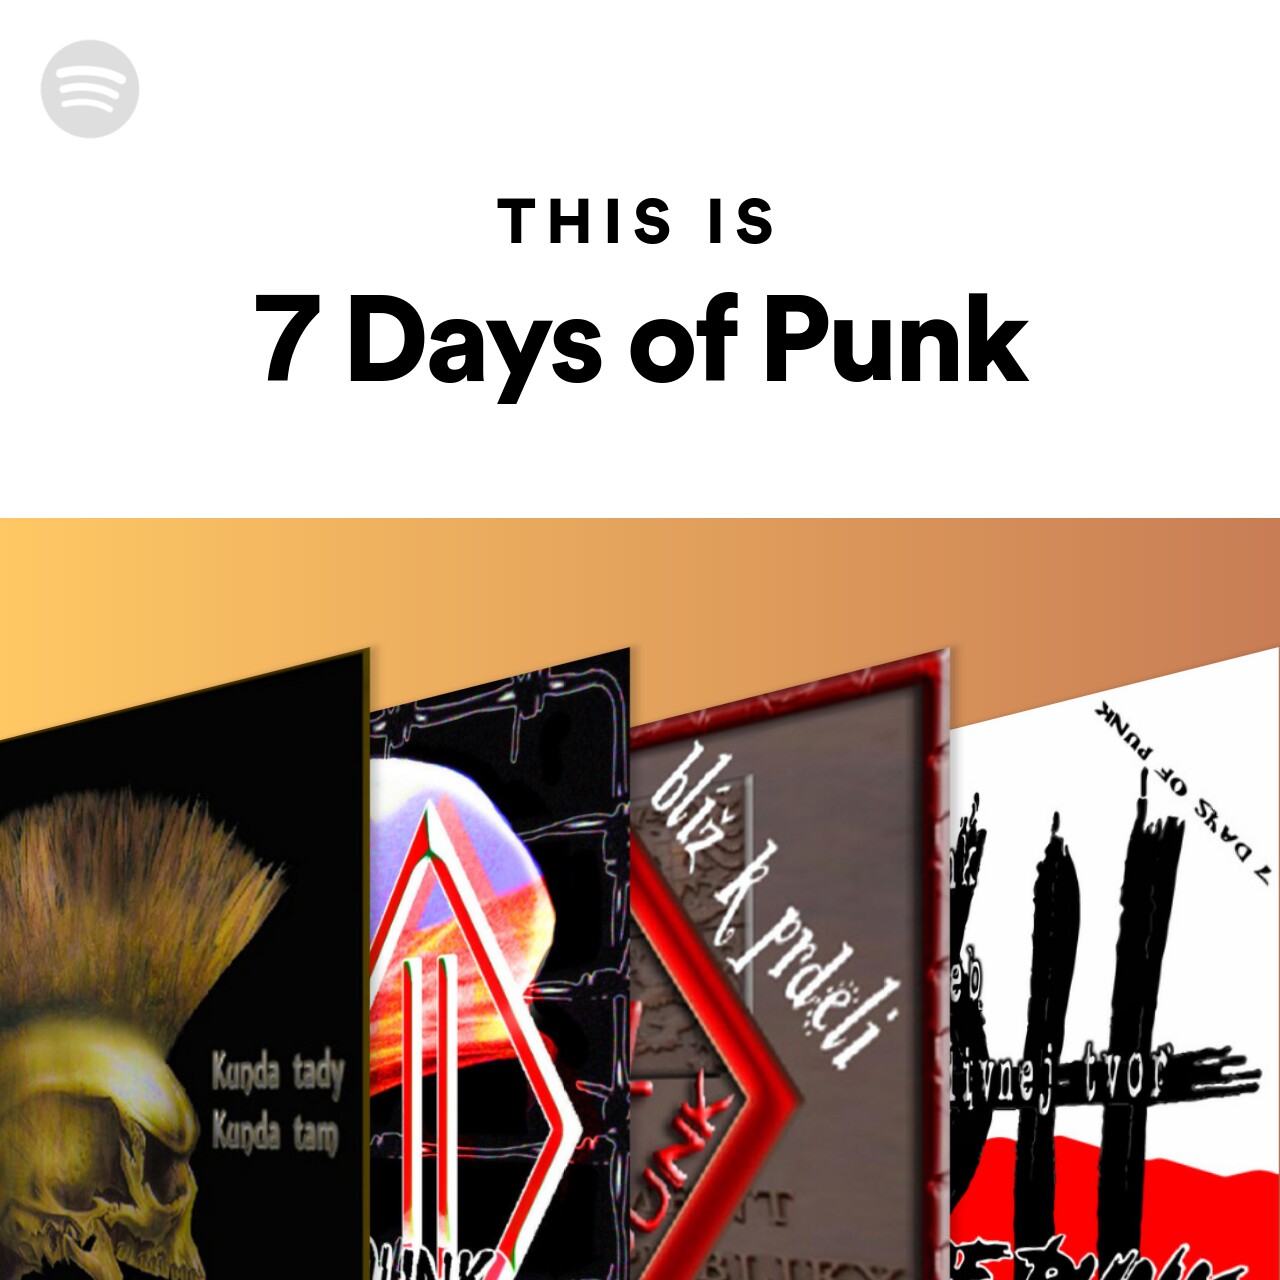 This Is 7 Days of Punk